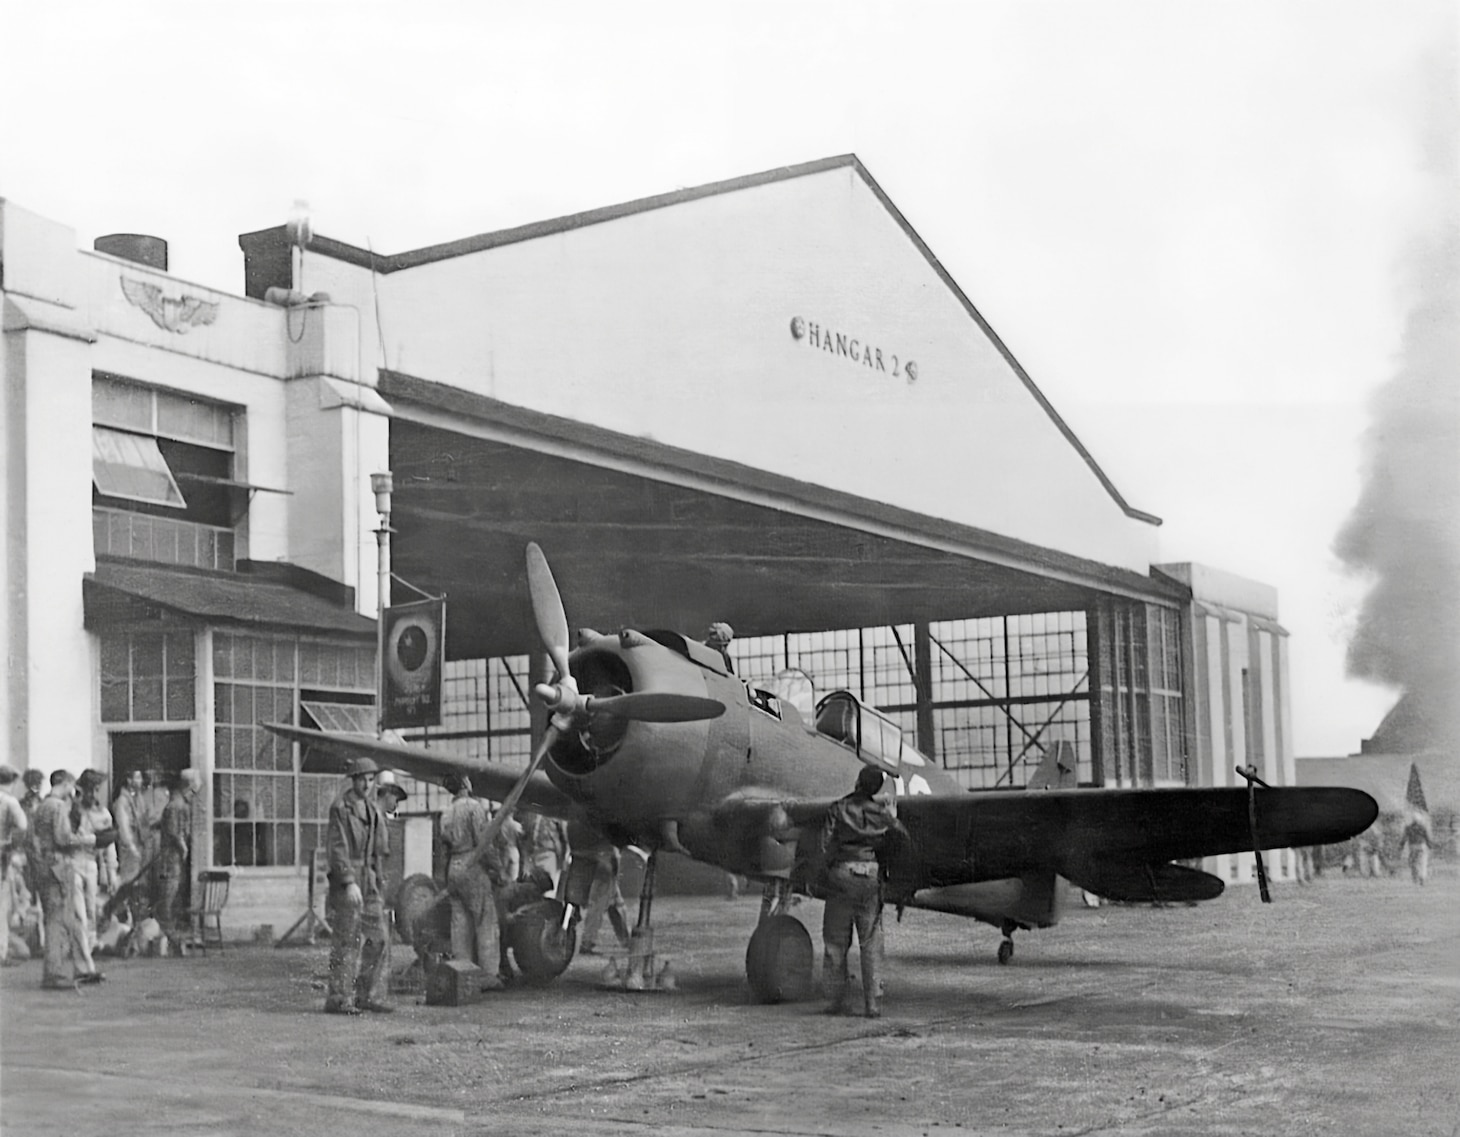 This P-36A is in front of Hangar 2 and may have been flown by 1st Lt. Lewis M. Sanders, CO of the 46th Pursuit Squadron on the morning of Dec. 7. It appears that the workers have raised the covers of the breeches of the nose .50-caliber machine guns. Sanders received the Silver Star for leading four P-36s against a formation of Japanese Zero fighters, with a furious dogfight developing.